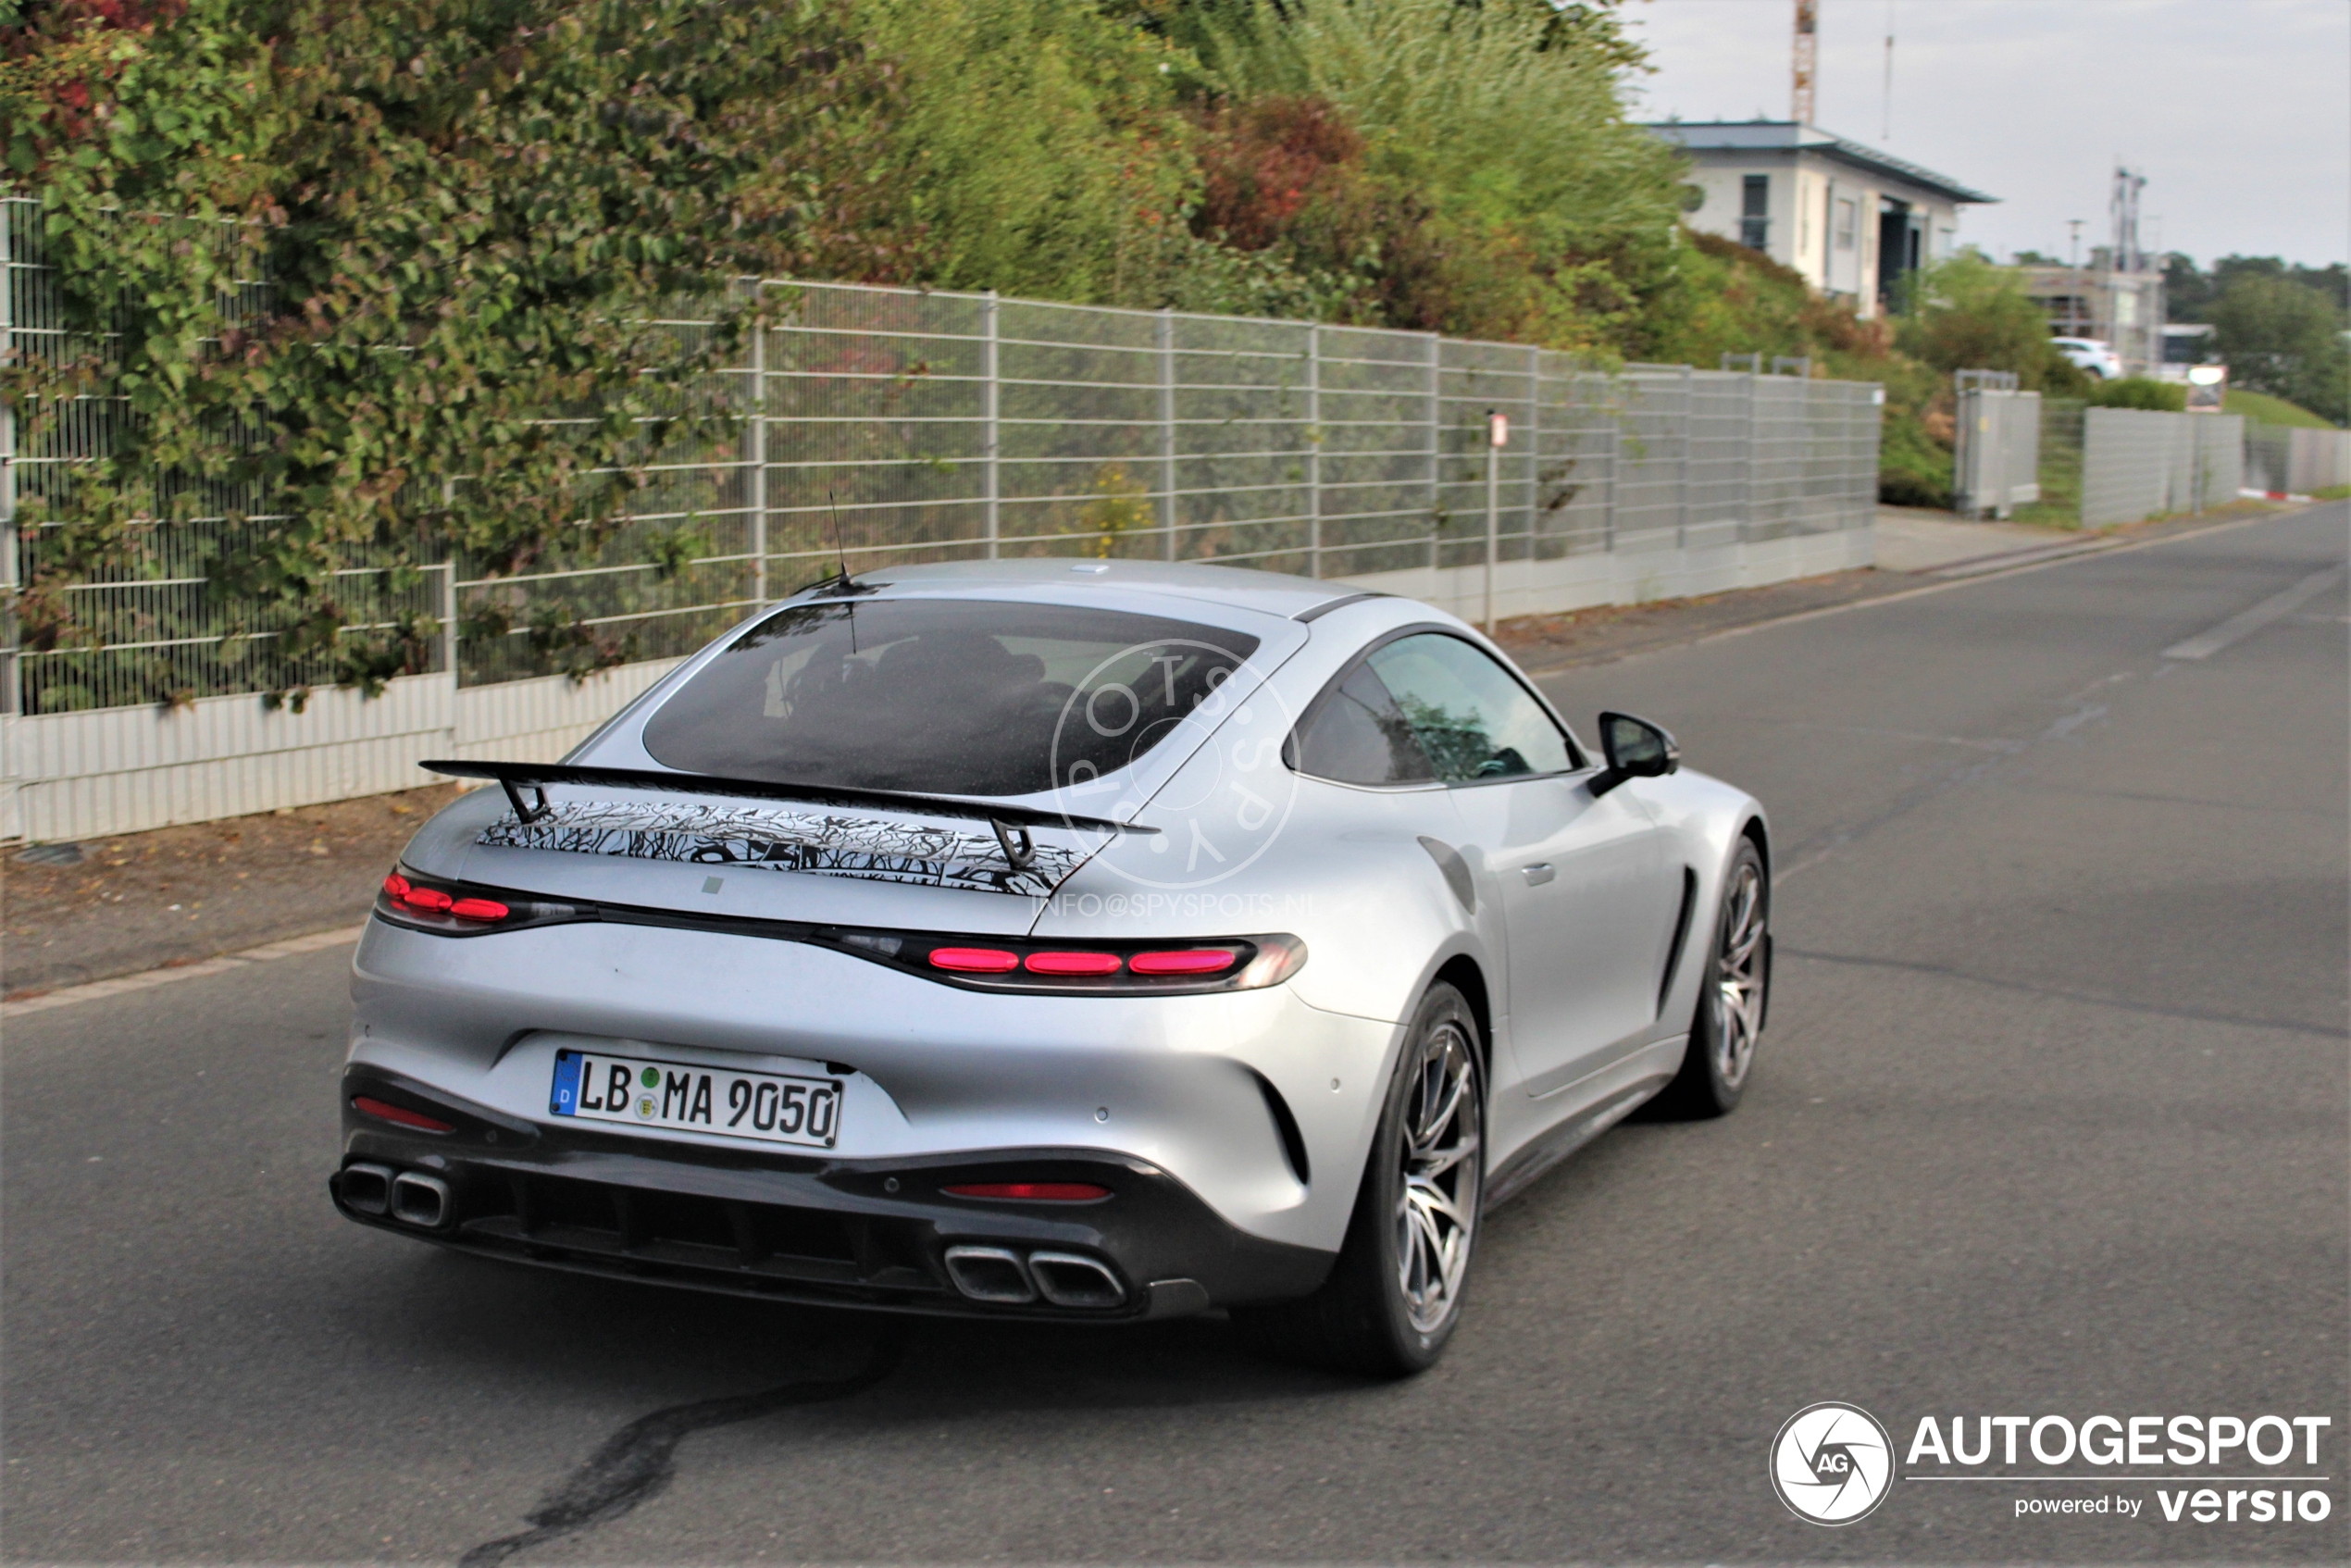 Here we see the very first undisguised Mercedes-AMG GT 63 C192.